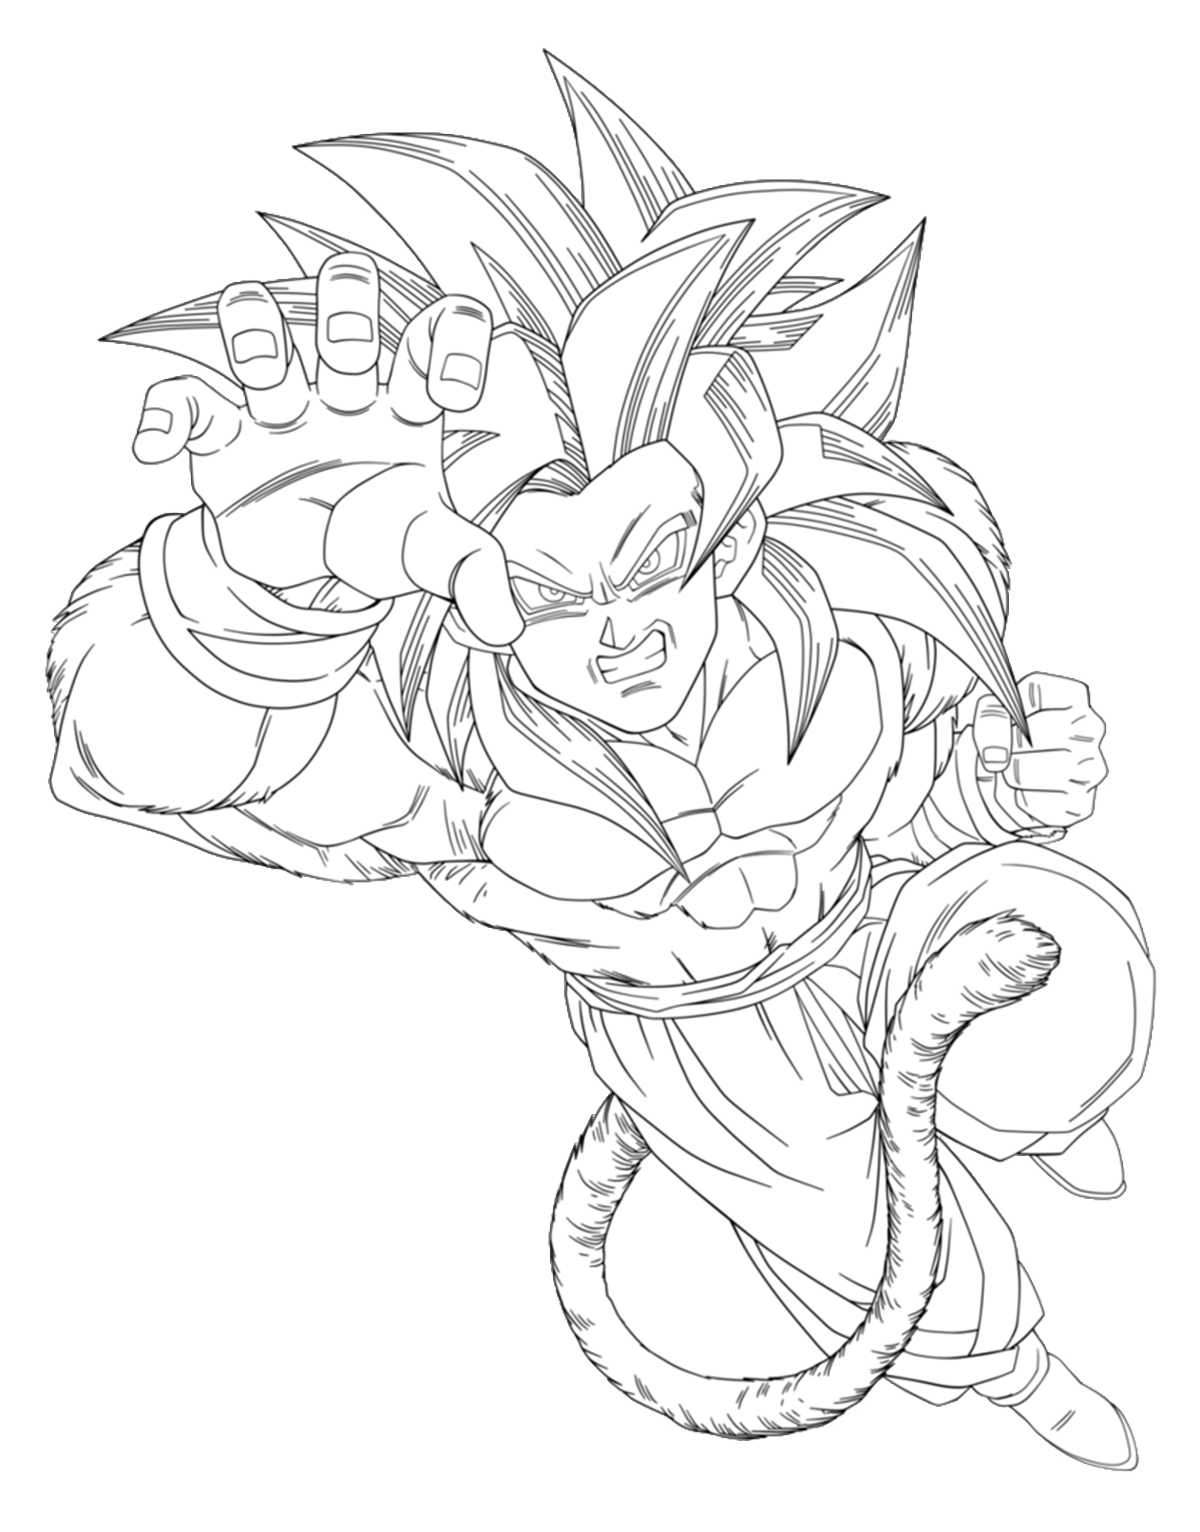 Dragon ball z free to color for kids - Dragon Ball Z Kids Coloring Pages